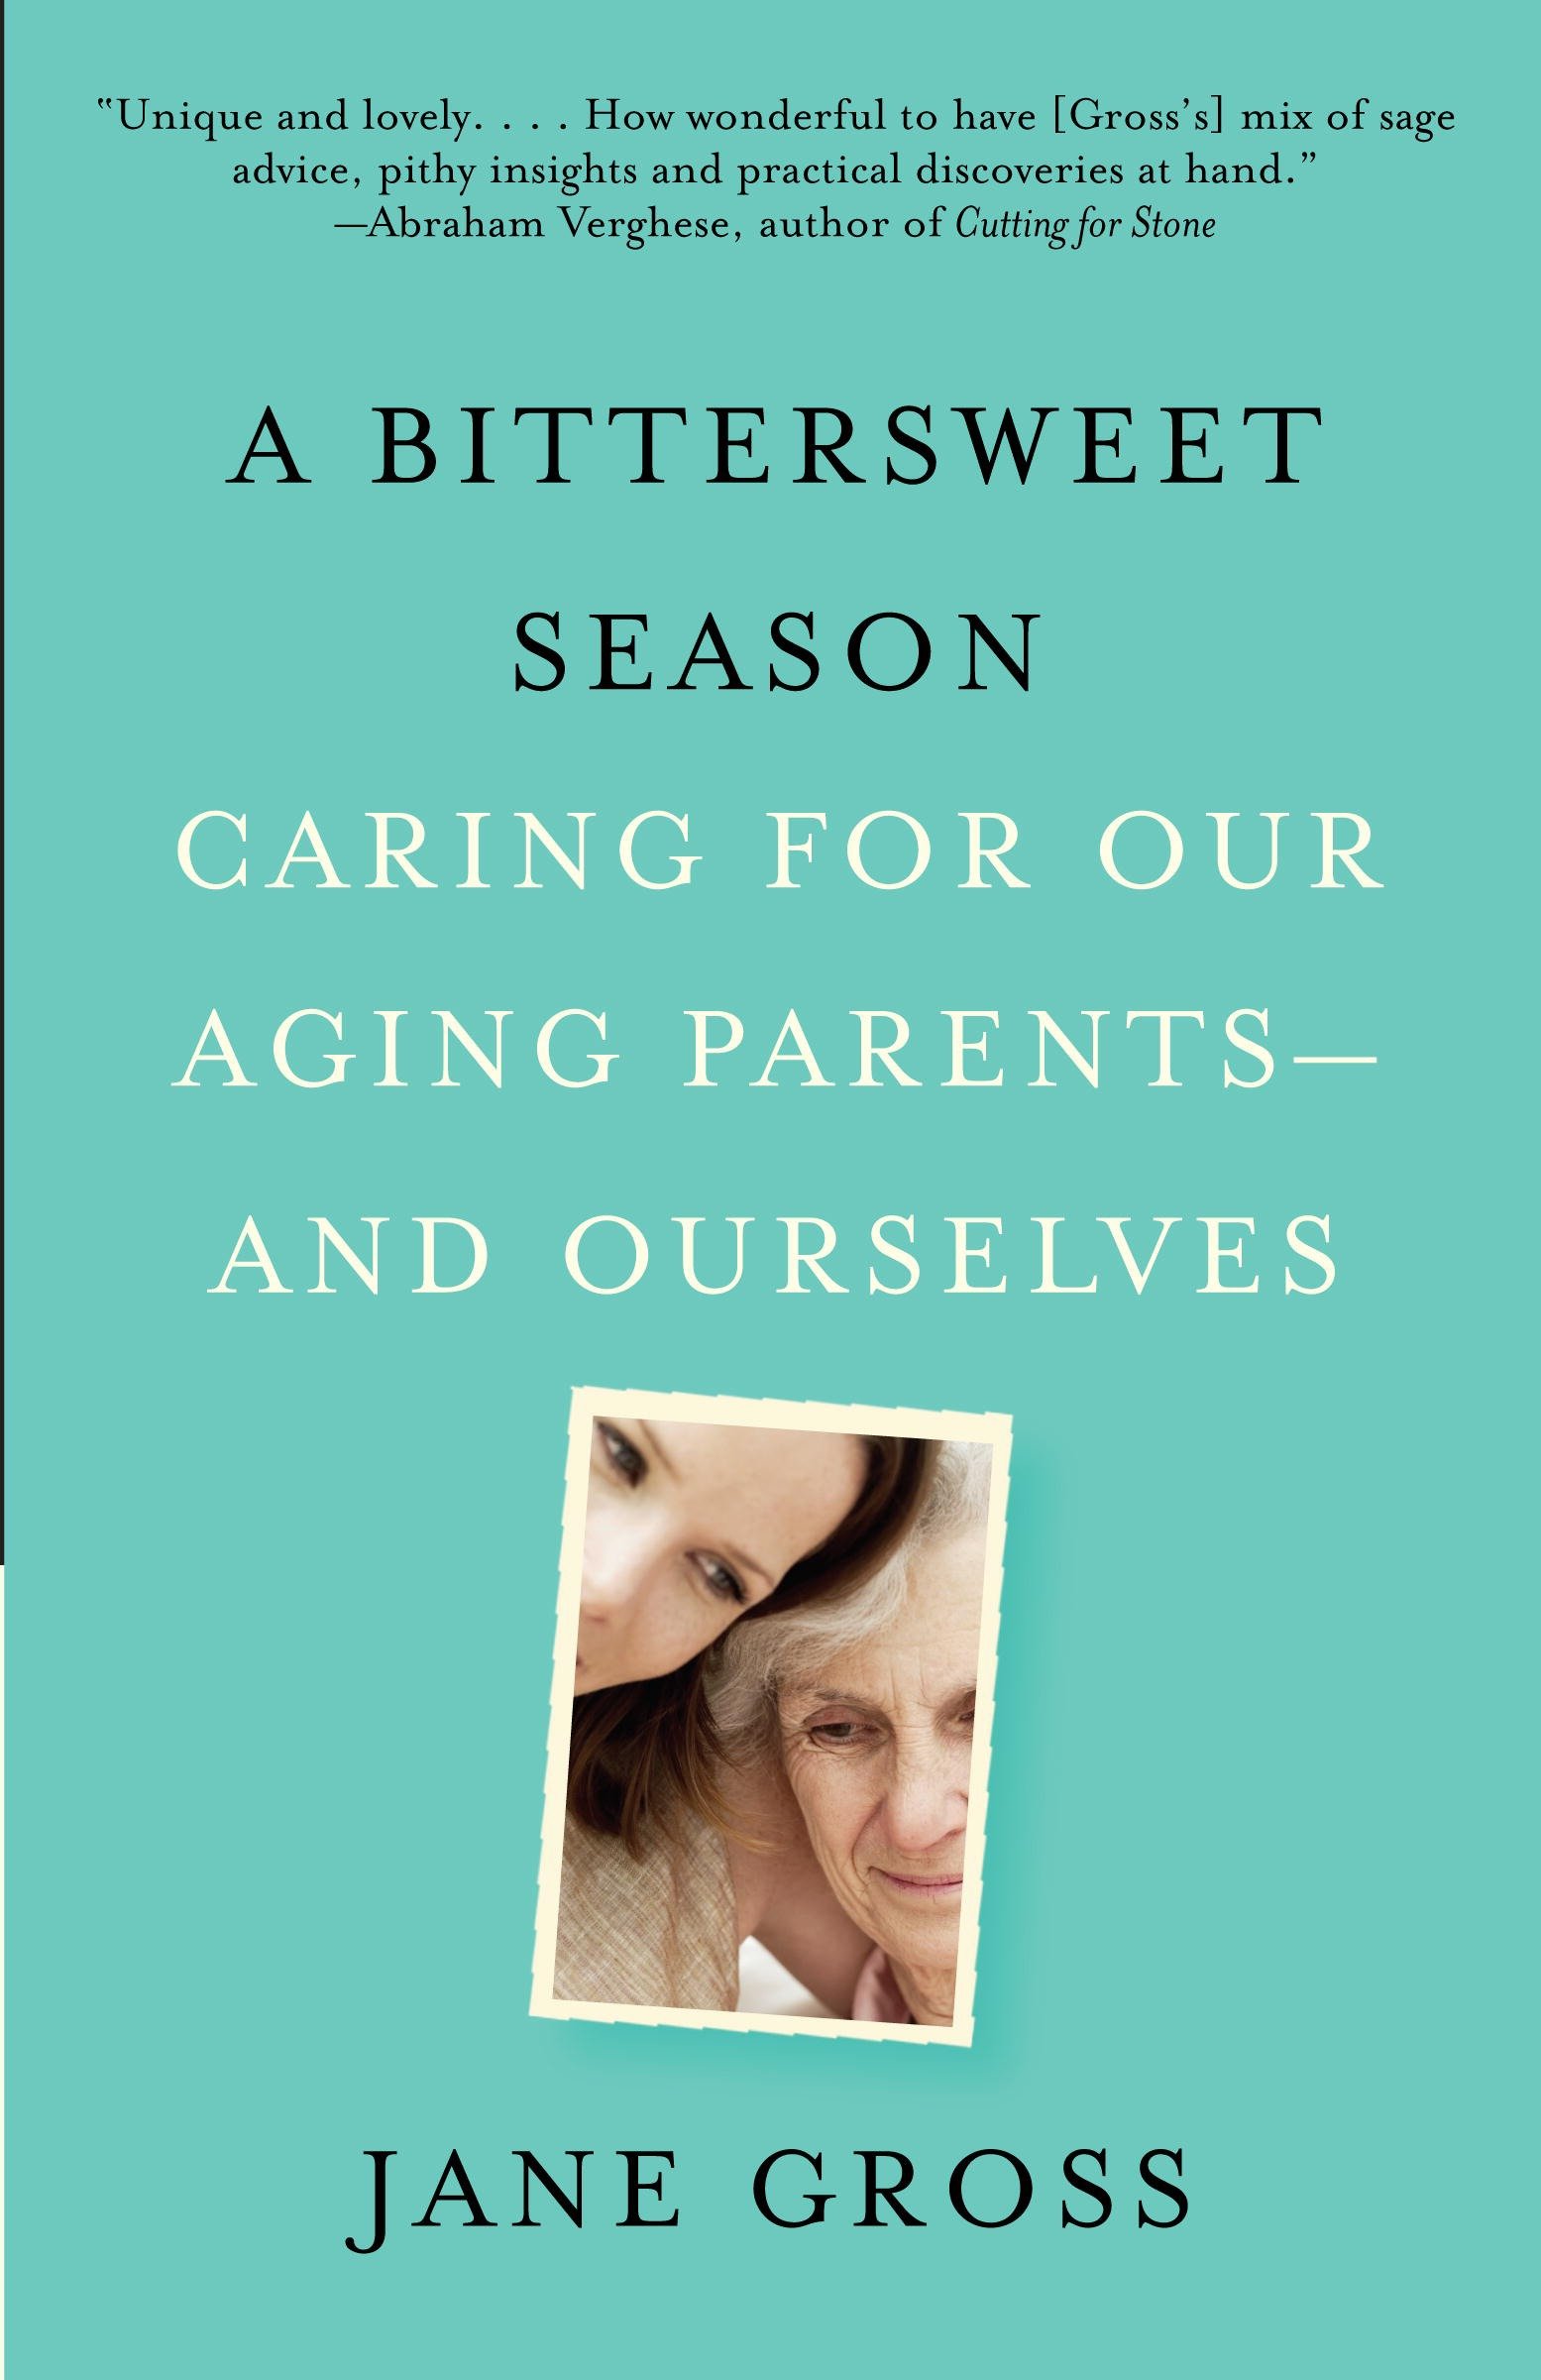 Cover Image of A Bittersweet Season